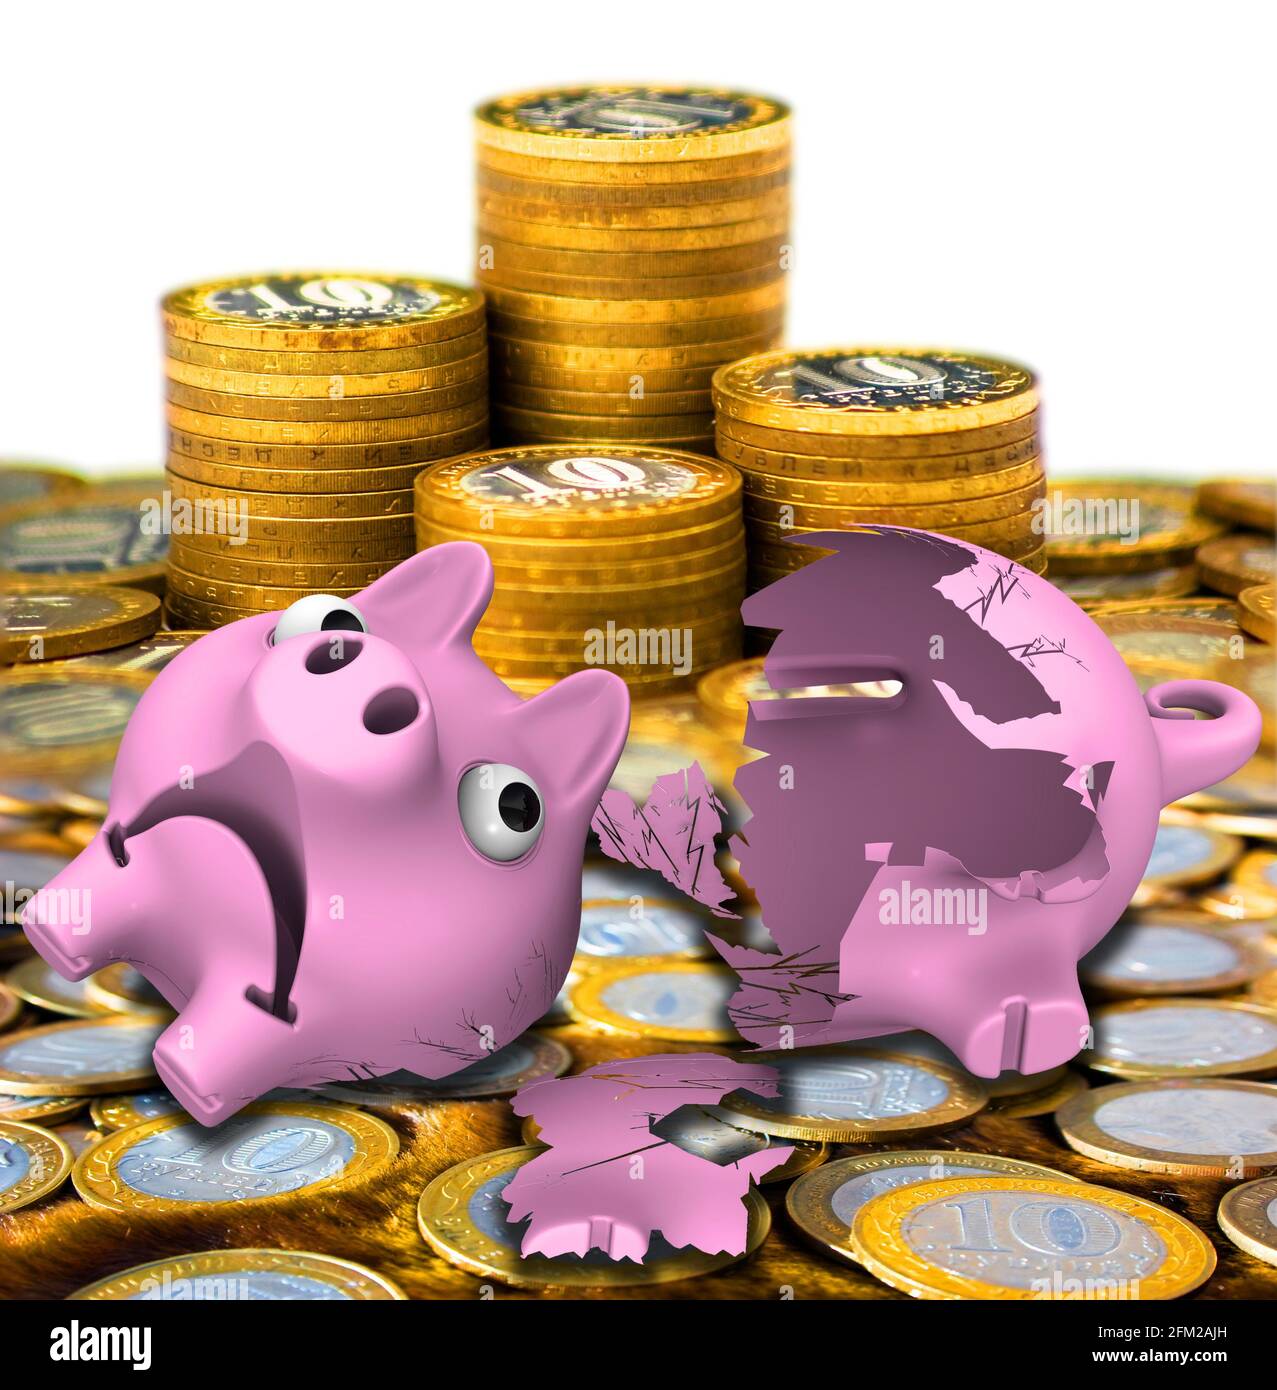 Broken piggy bank with coins. Broken money box in form of piggy on surface of Russian coins. 3D Illustration Stock Photo